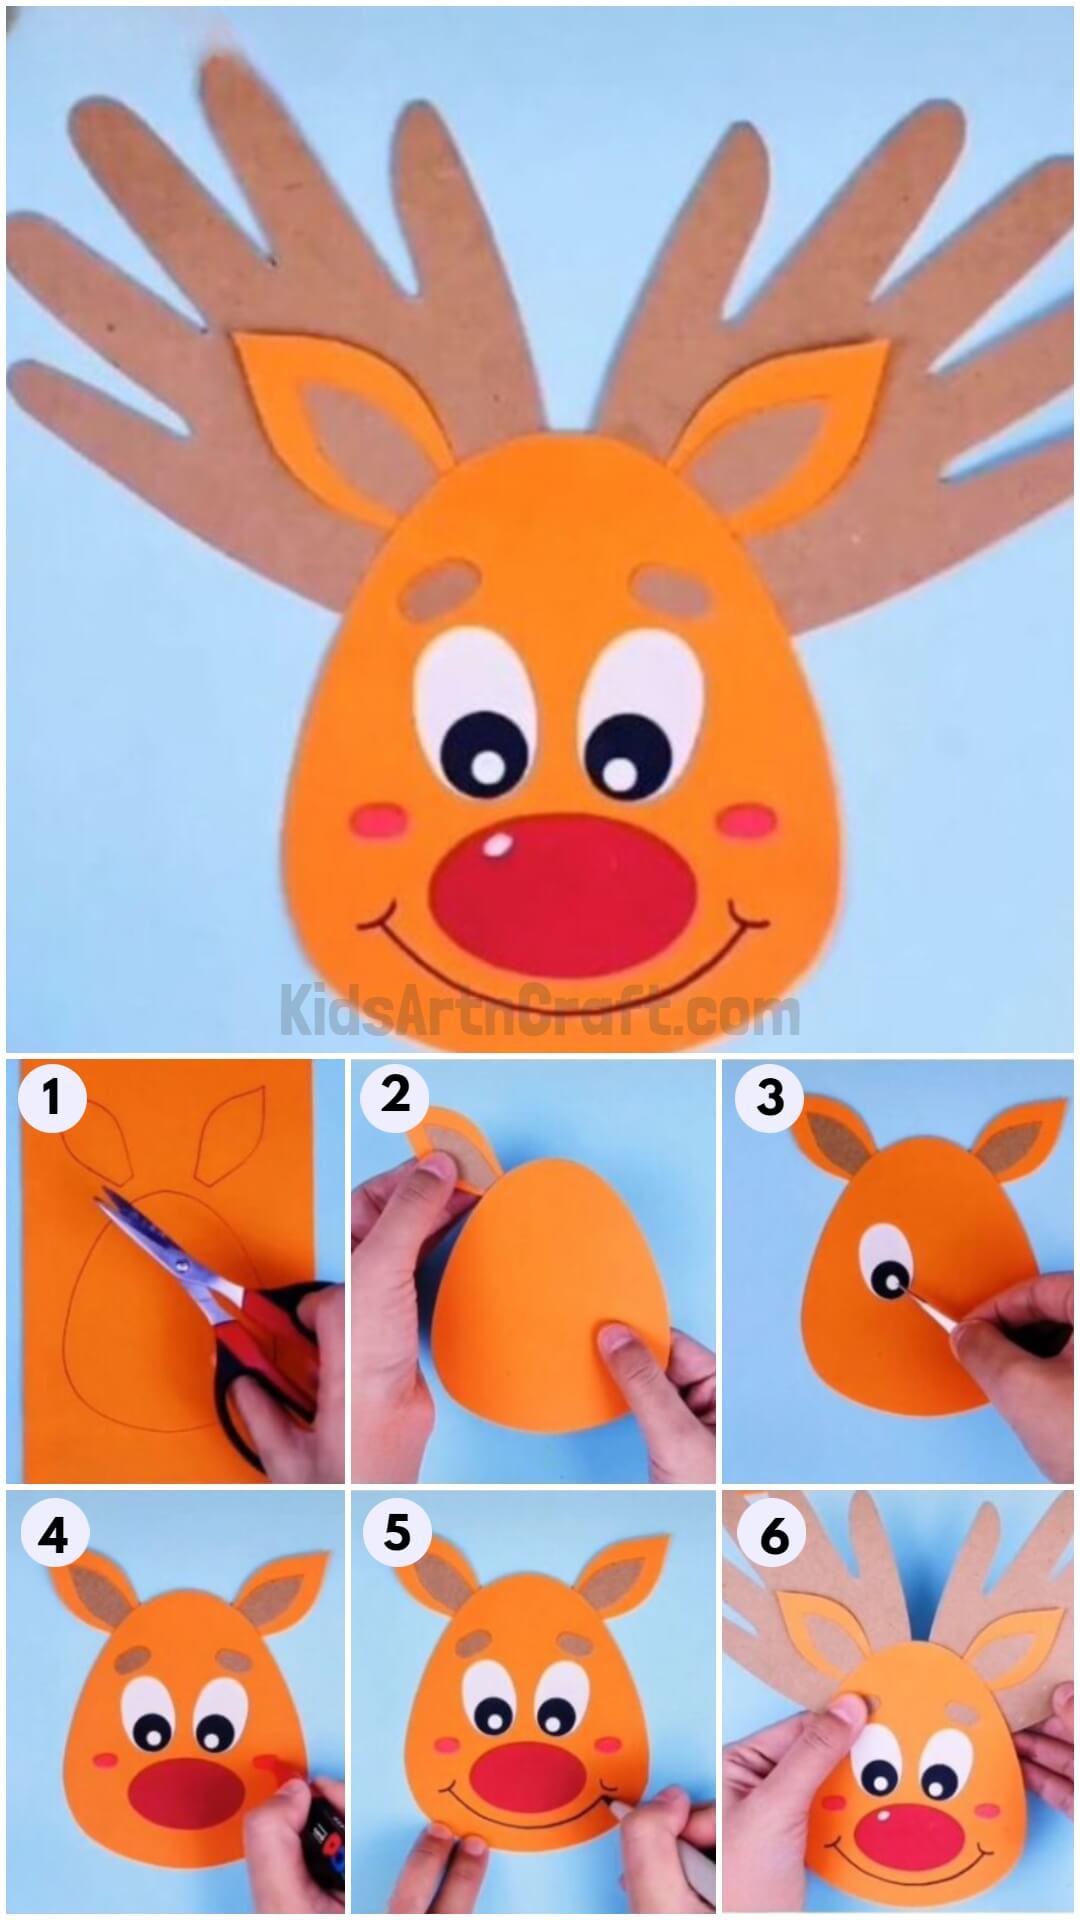 How to Make Paper Reindeer - Step by Step Instructions